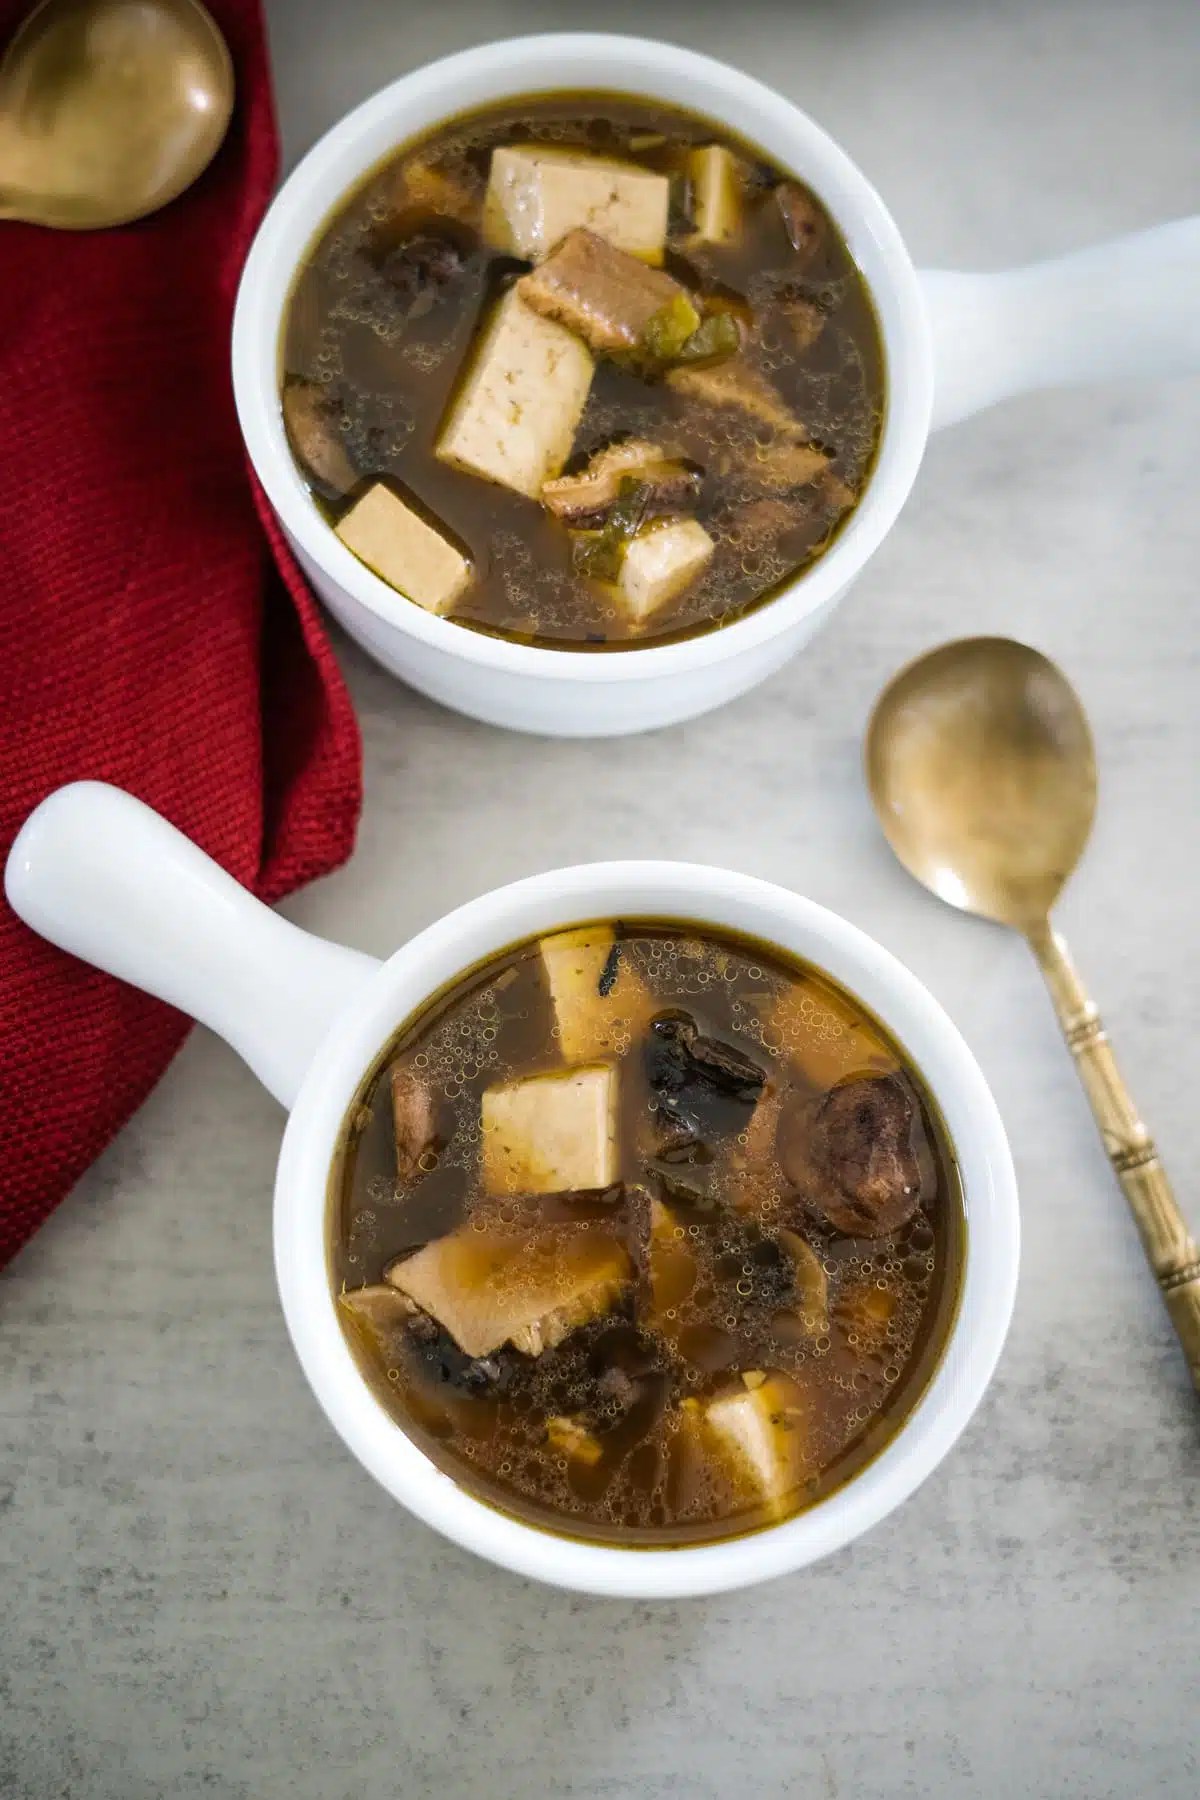 Two bowls of soup with tofu and mushrooms.